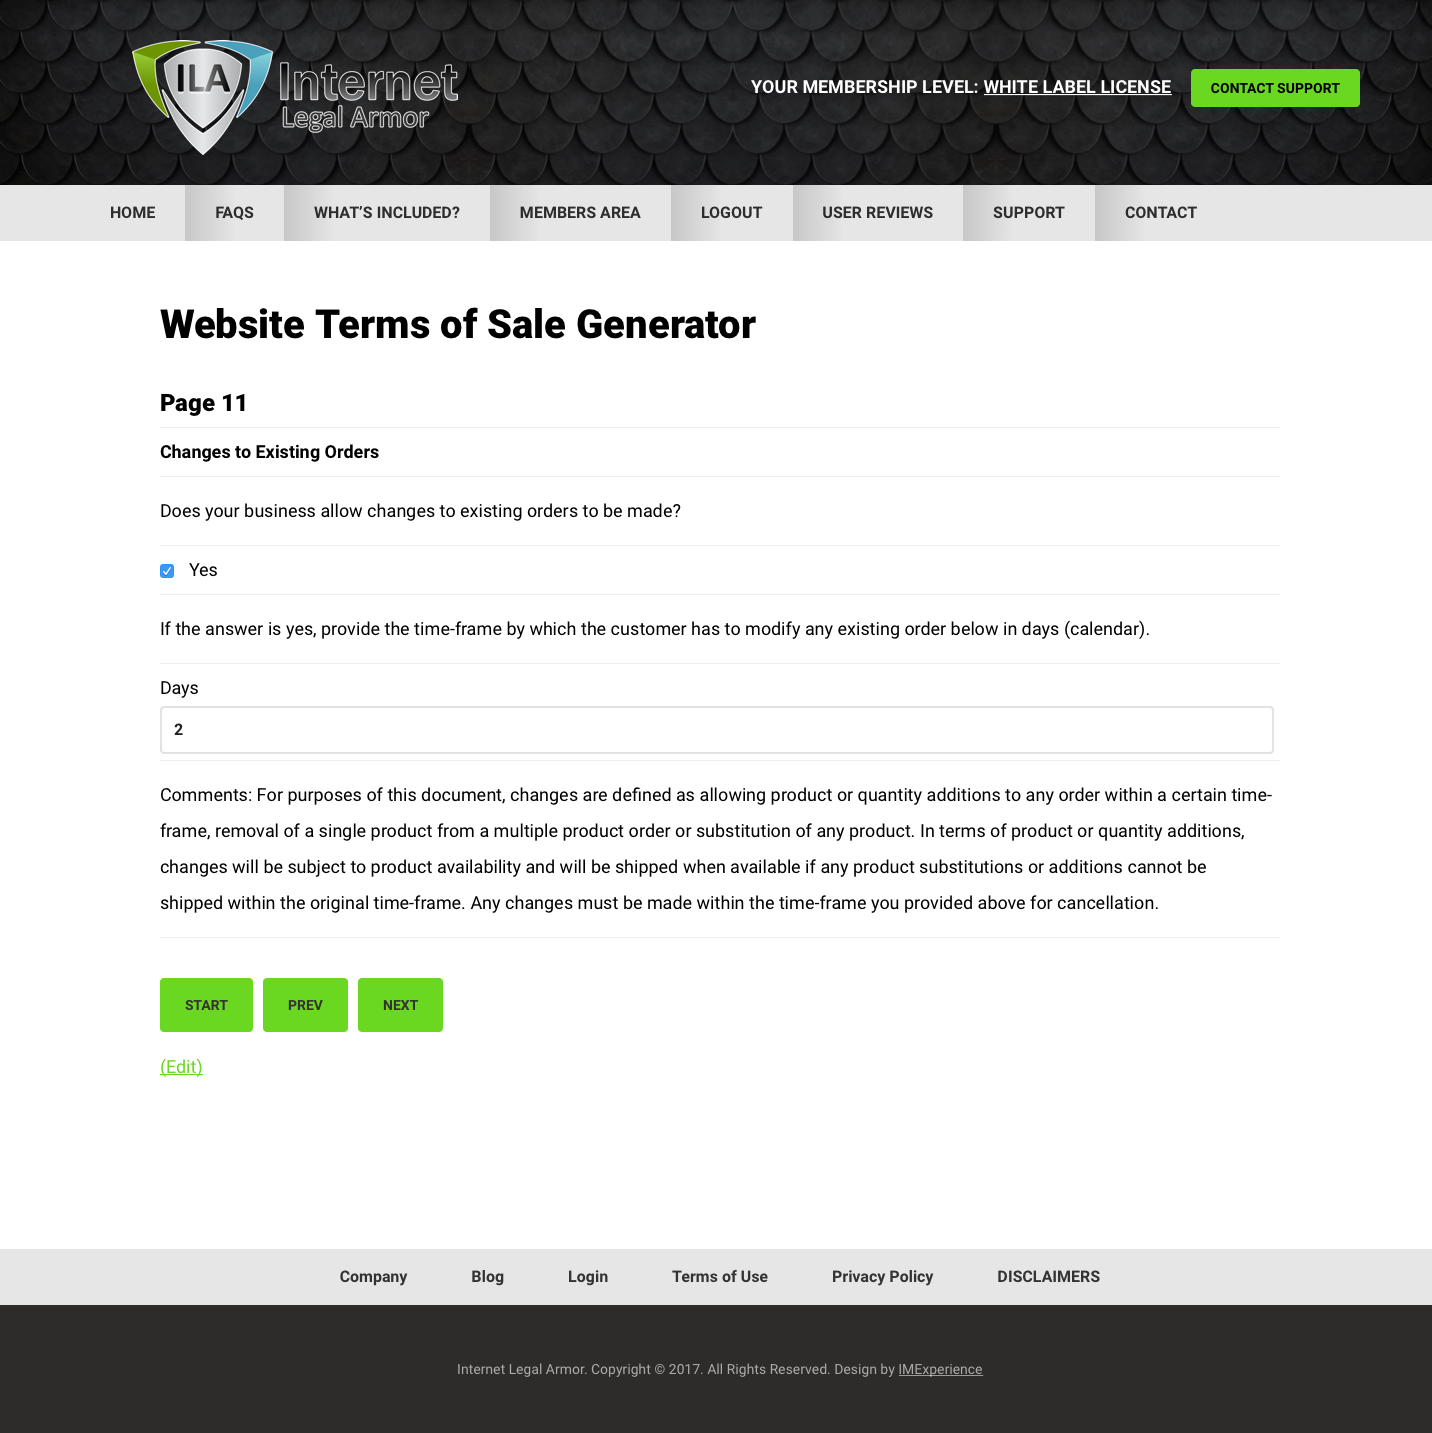 Website Terms of Sale Generator (Sale of Tangible Goods)